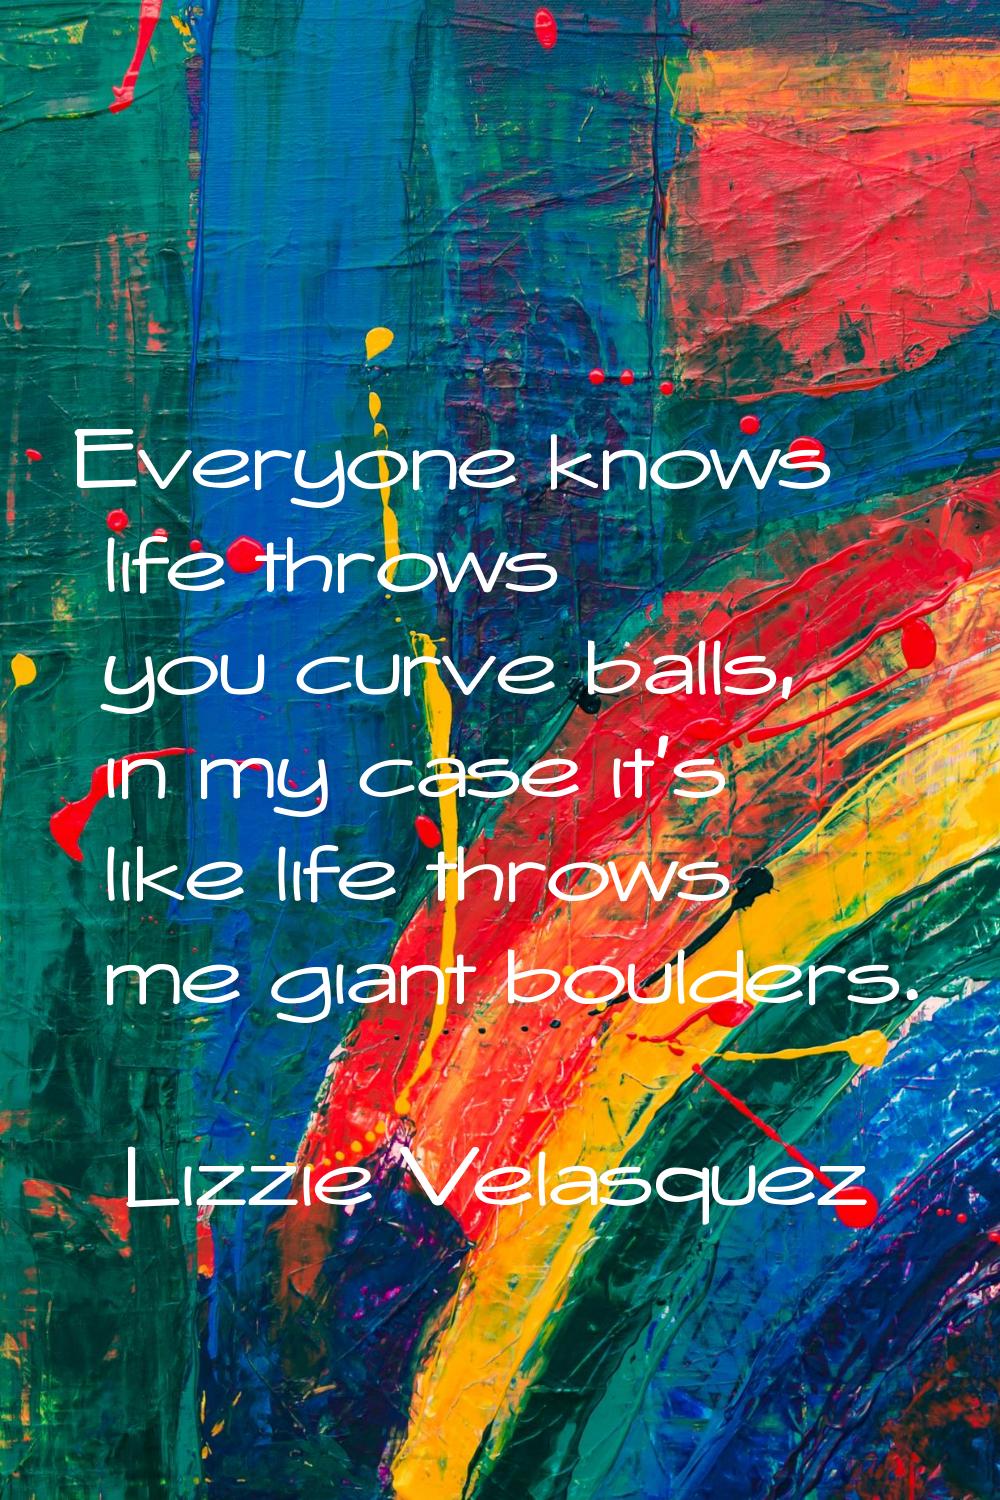 Everyone knows life throws you curve balls, in my case it's like life throws me giant boulders.